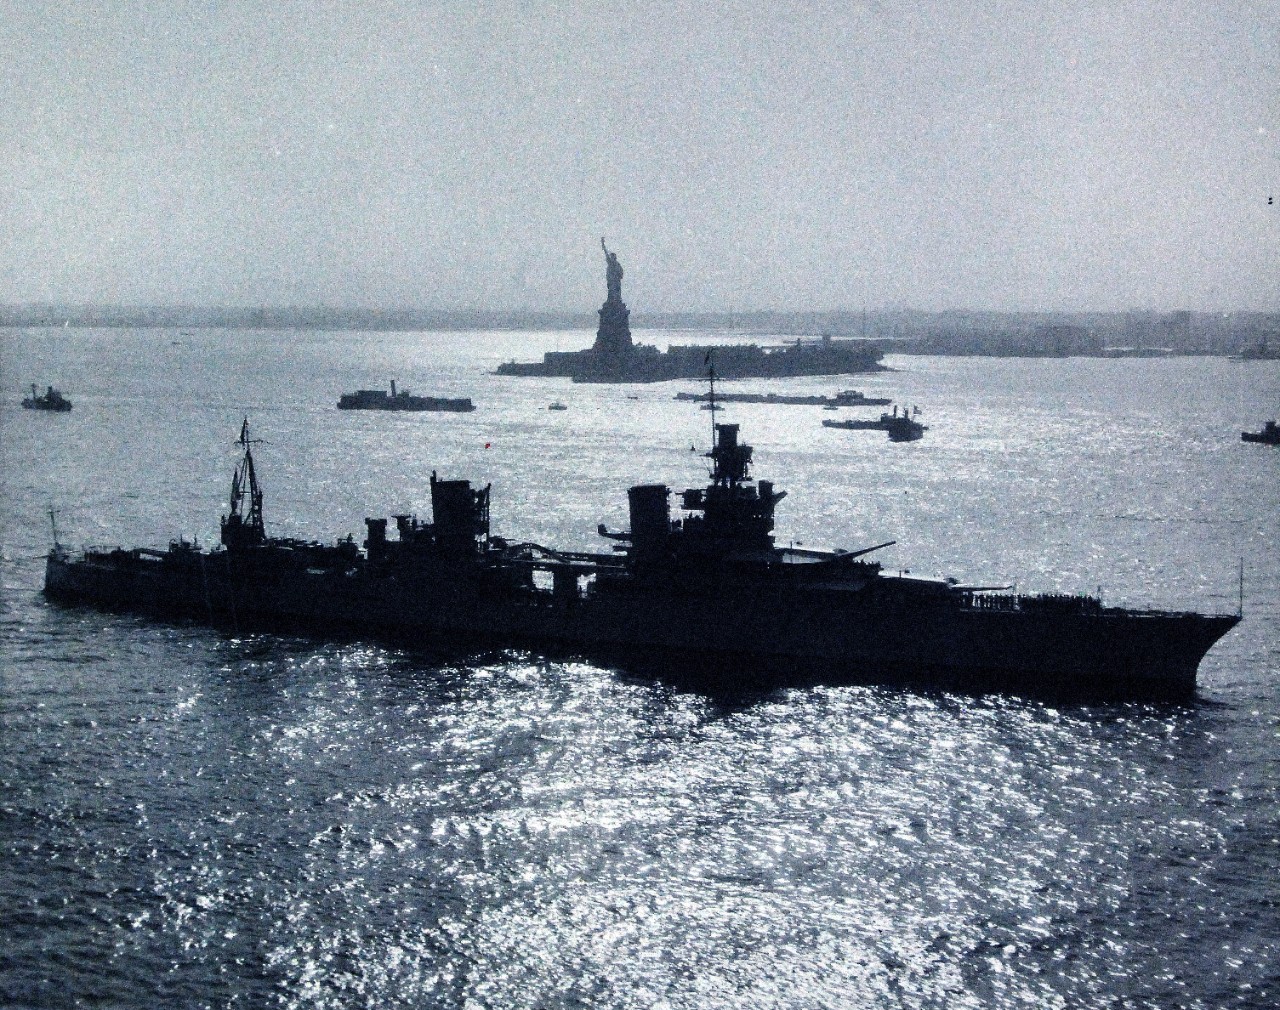 80-G-463032:   USS Indianapolis (CA 35), 1934.  Indianapolis entering Hudson River, New York City, New York, with the Statue of Liberty in the background, May 31, 1934.  Official U.S. Navy Photograph, now in the collections of the National Archives .   (2015/4/14).  